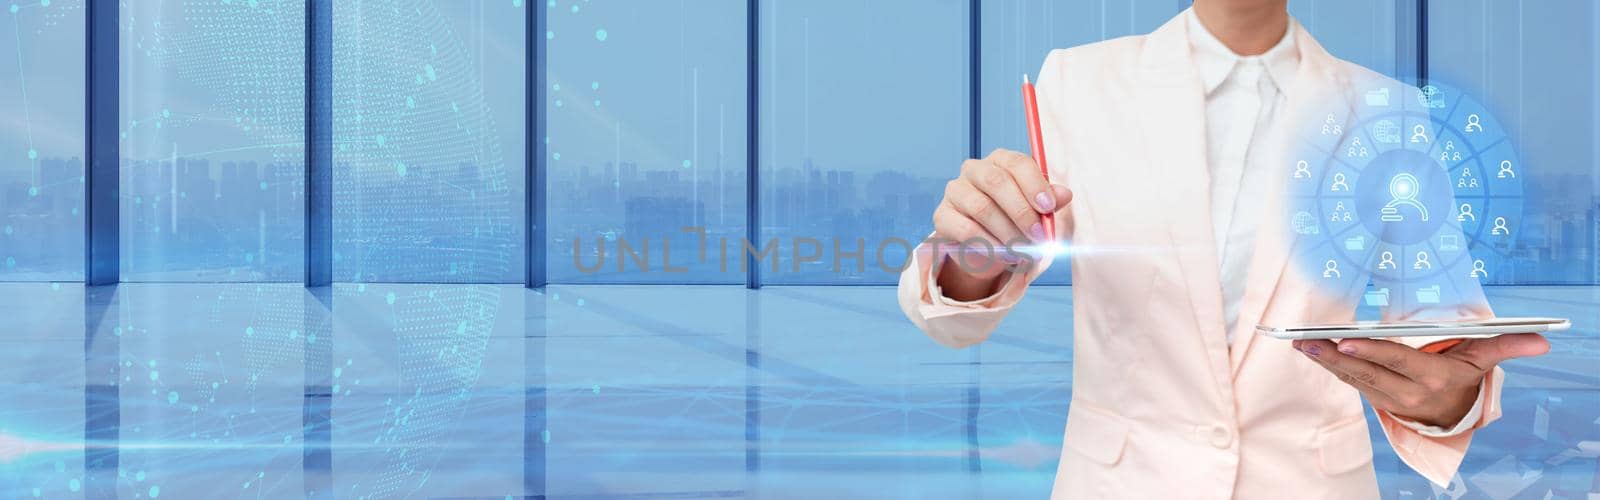 Businessman Holding Tablet Lightly Presenting Futuristic Technology.